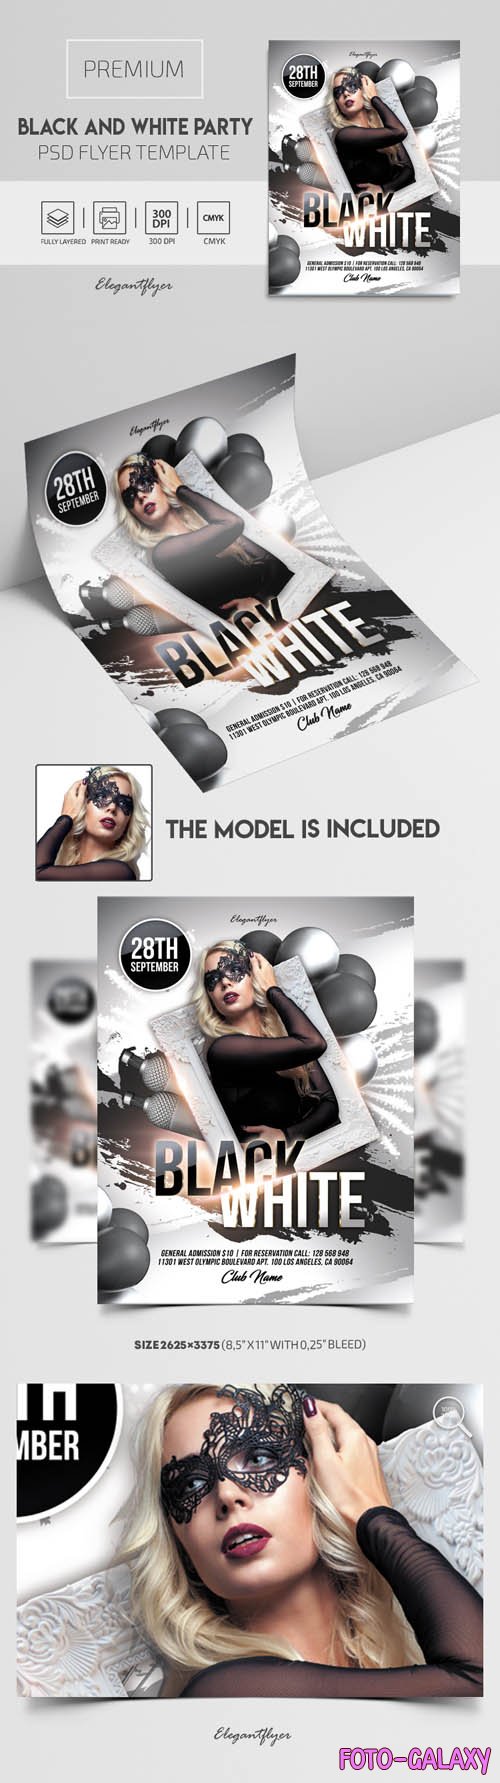 Black and White Party Flyer PSD Template